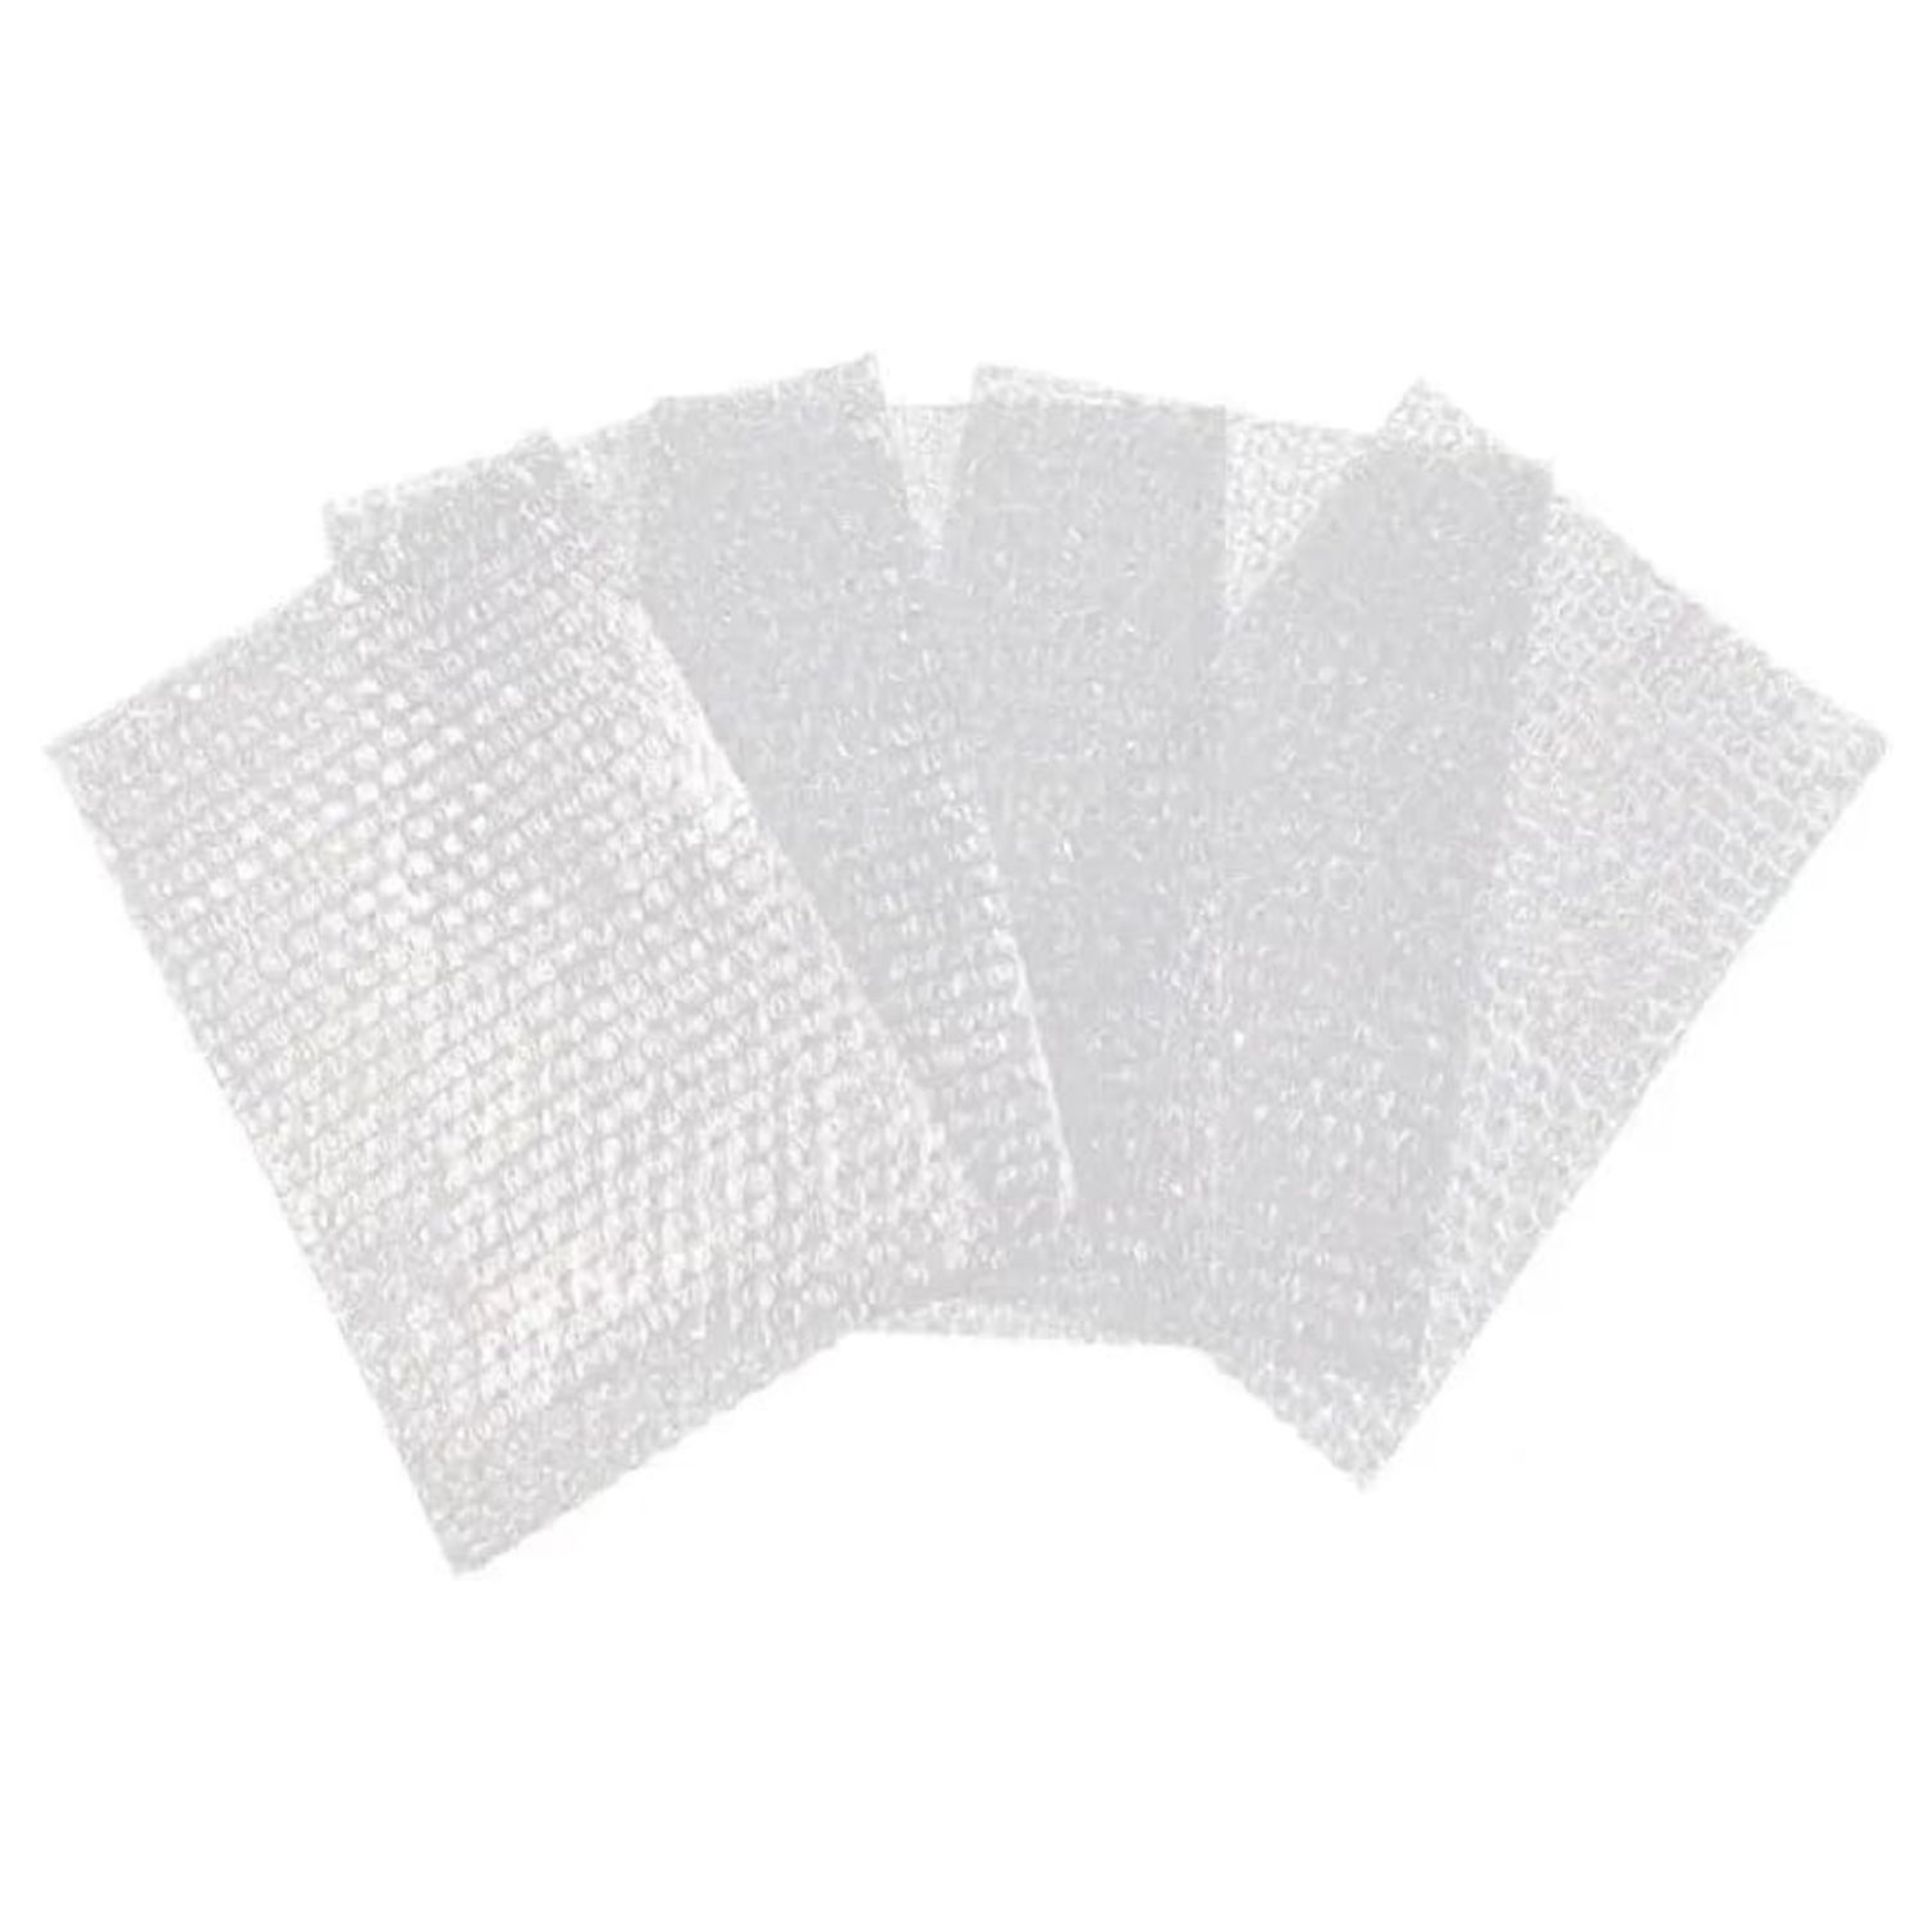 10 BOXES OF 100 PEEL AND SEAL BUBBLE WRAP PREMIUM CLEAR POUCH BAGS, 100X135MM - Image 2 of 4